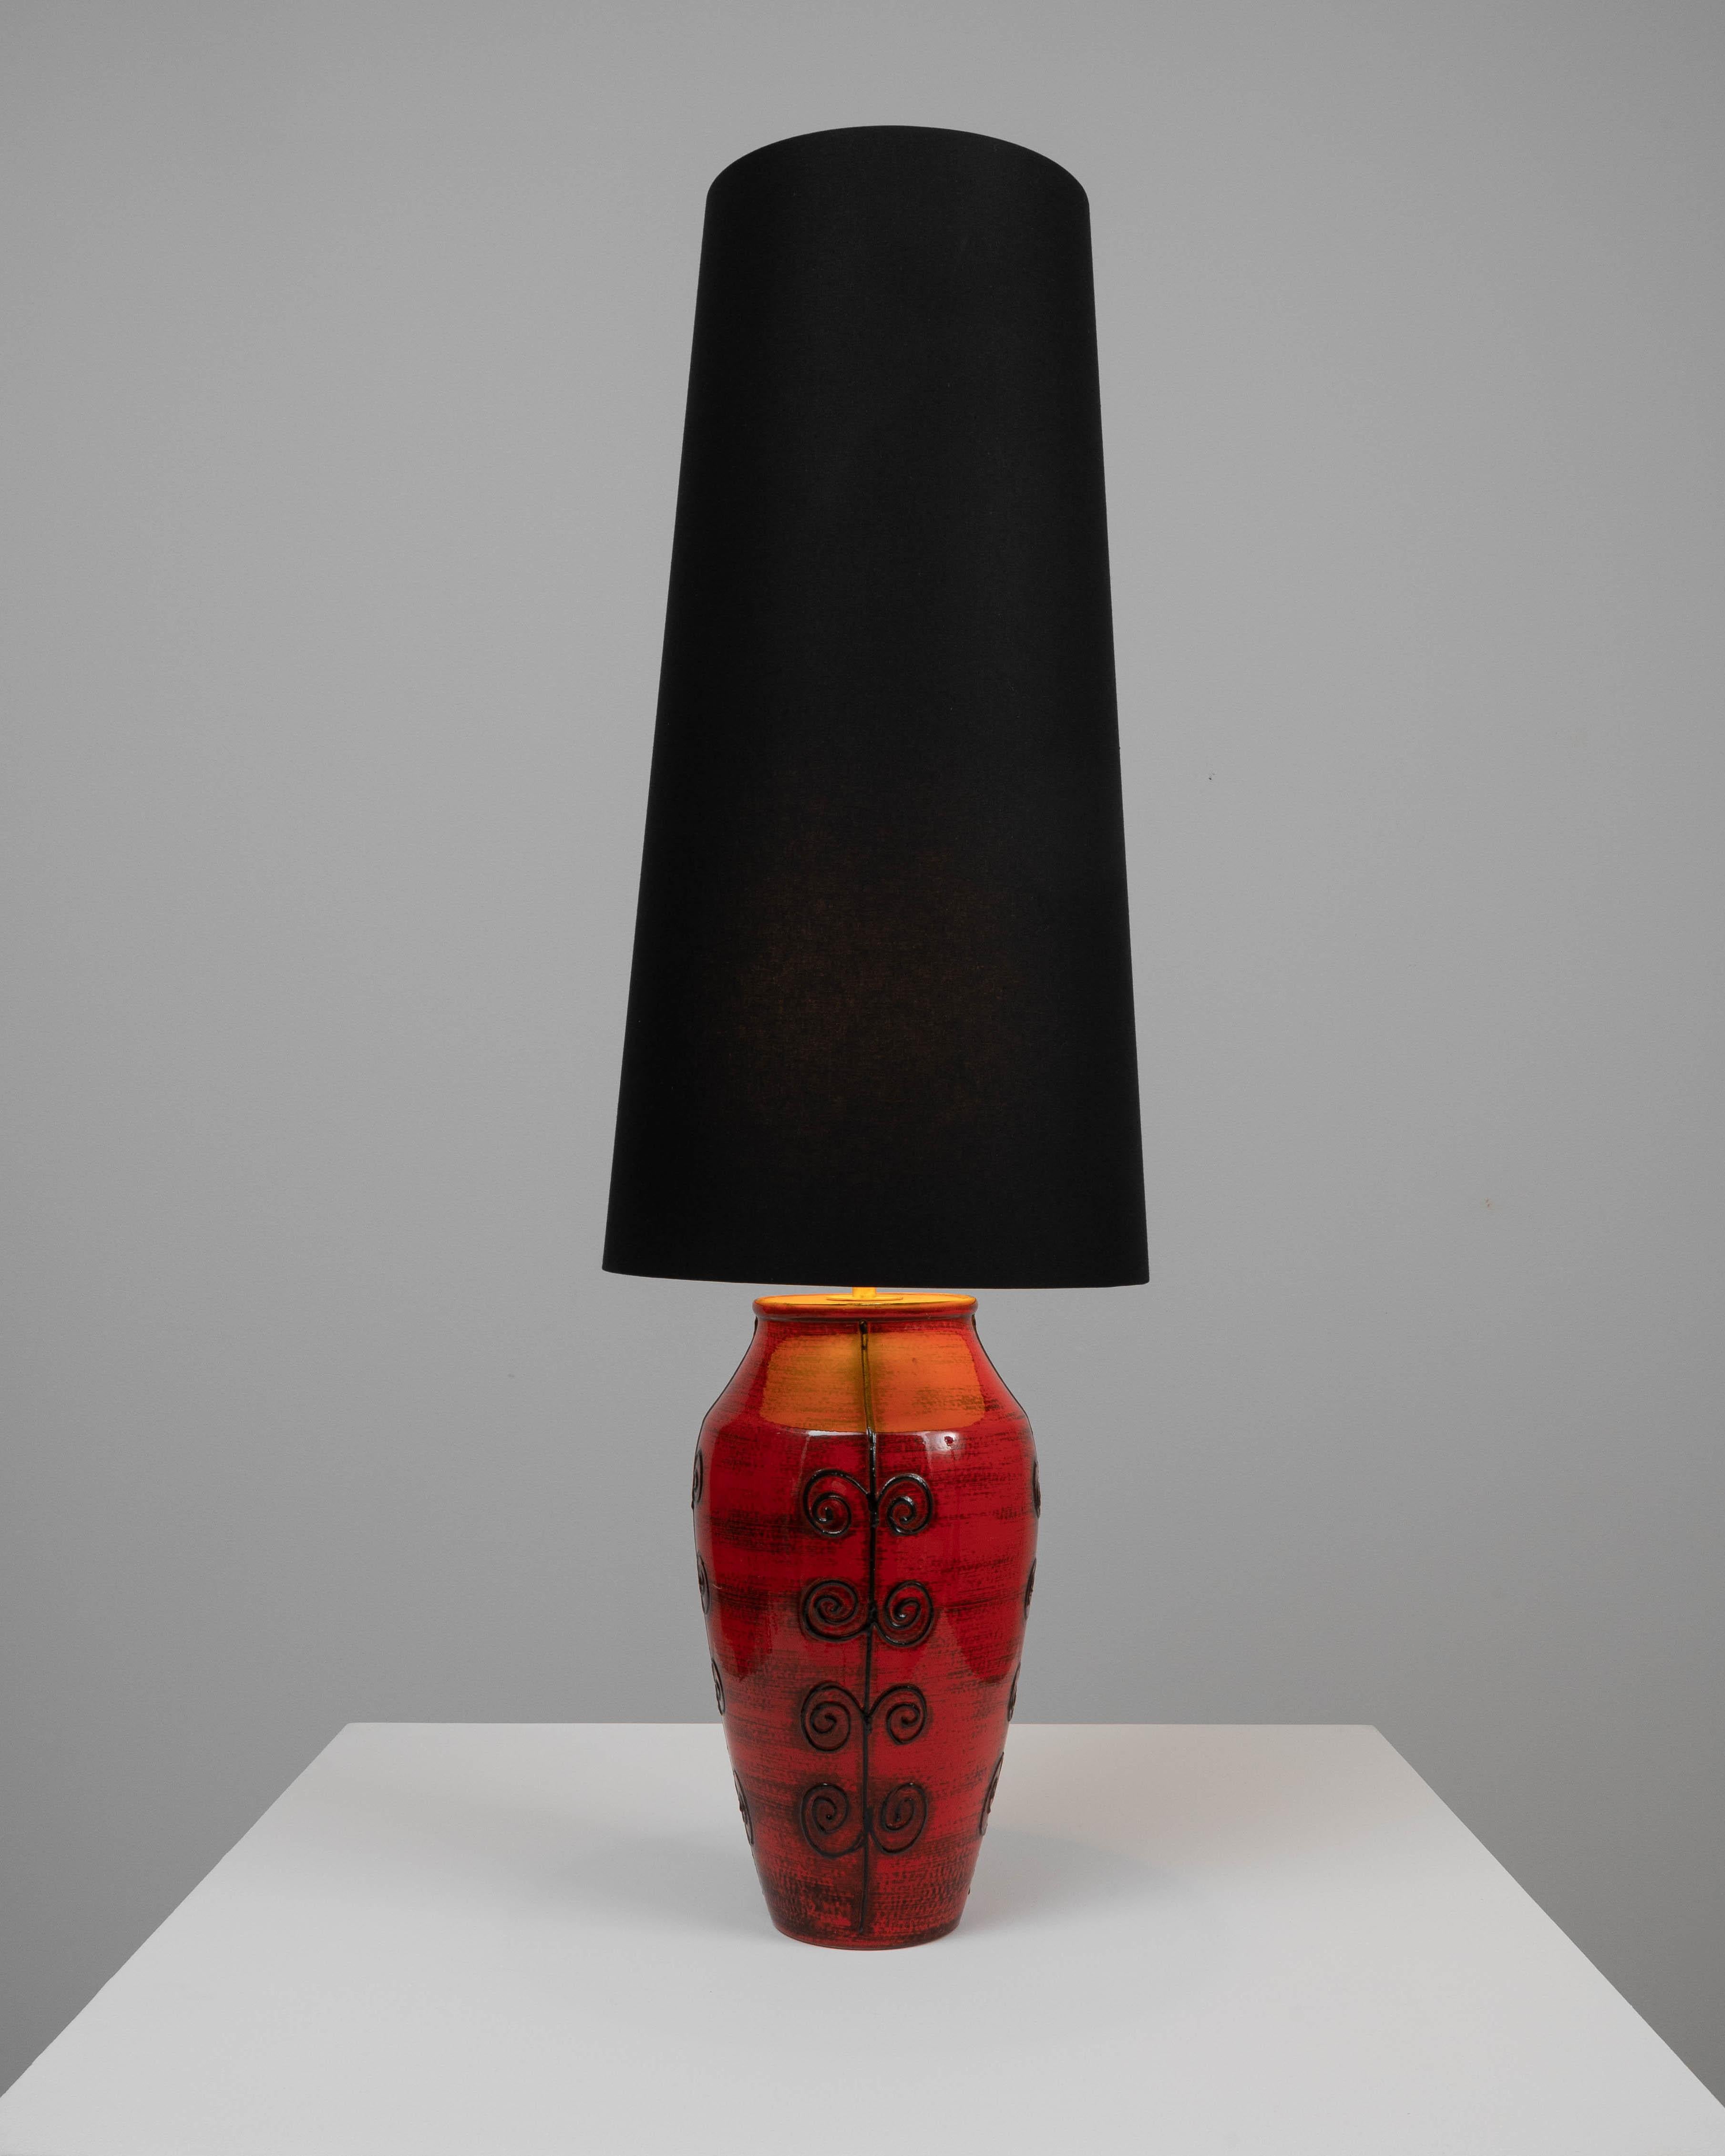 This eye-catching 20th-century German ceramic table lamp is a vibrant statement piece. The bold red base, with its glossy finish and swirling black accents, offers a dramatic contrast to the sleek black lampshade. The lamp's design combines the